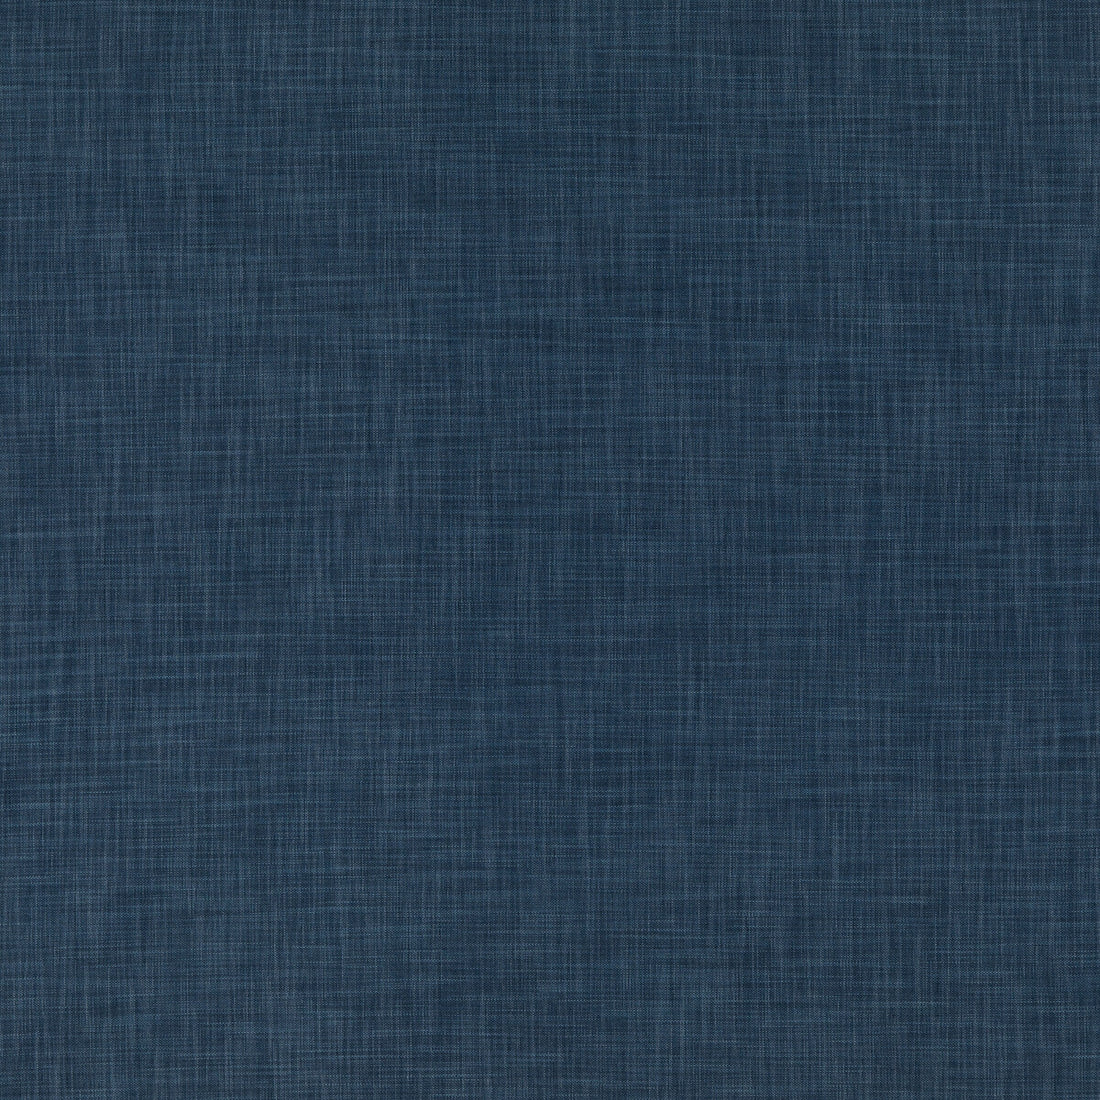 Kalahari fabric in indigo color - pattern ED85316.680.0 - by Threads in the Essential Weaves collection